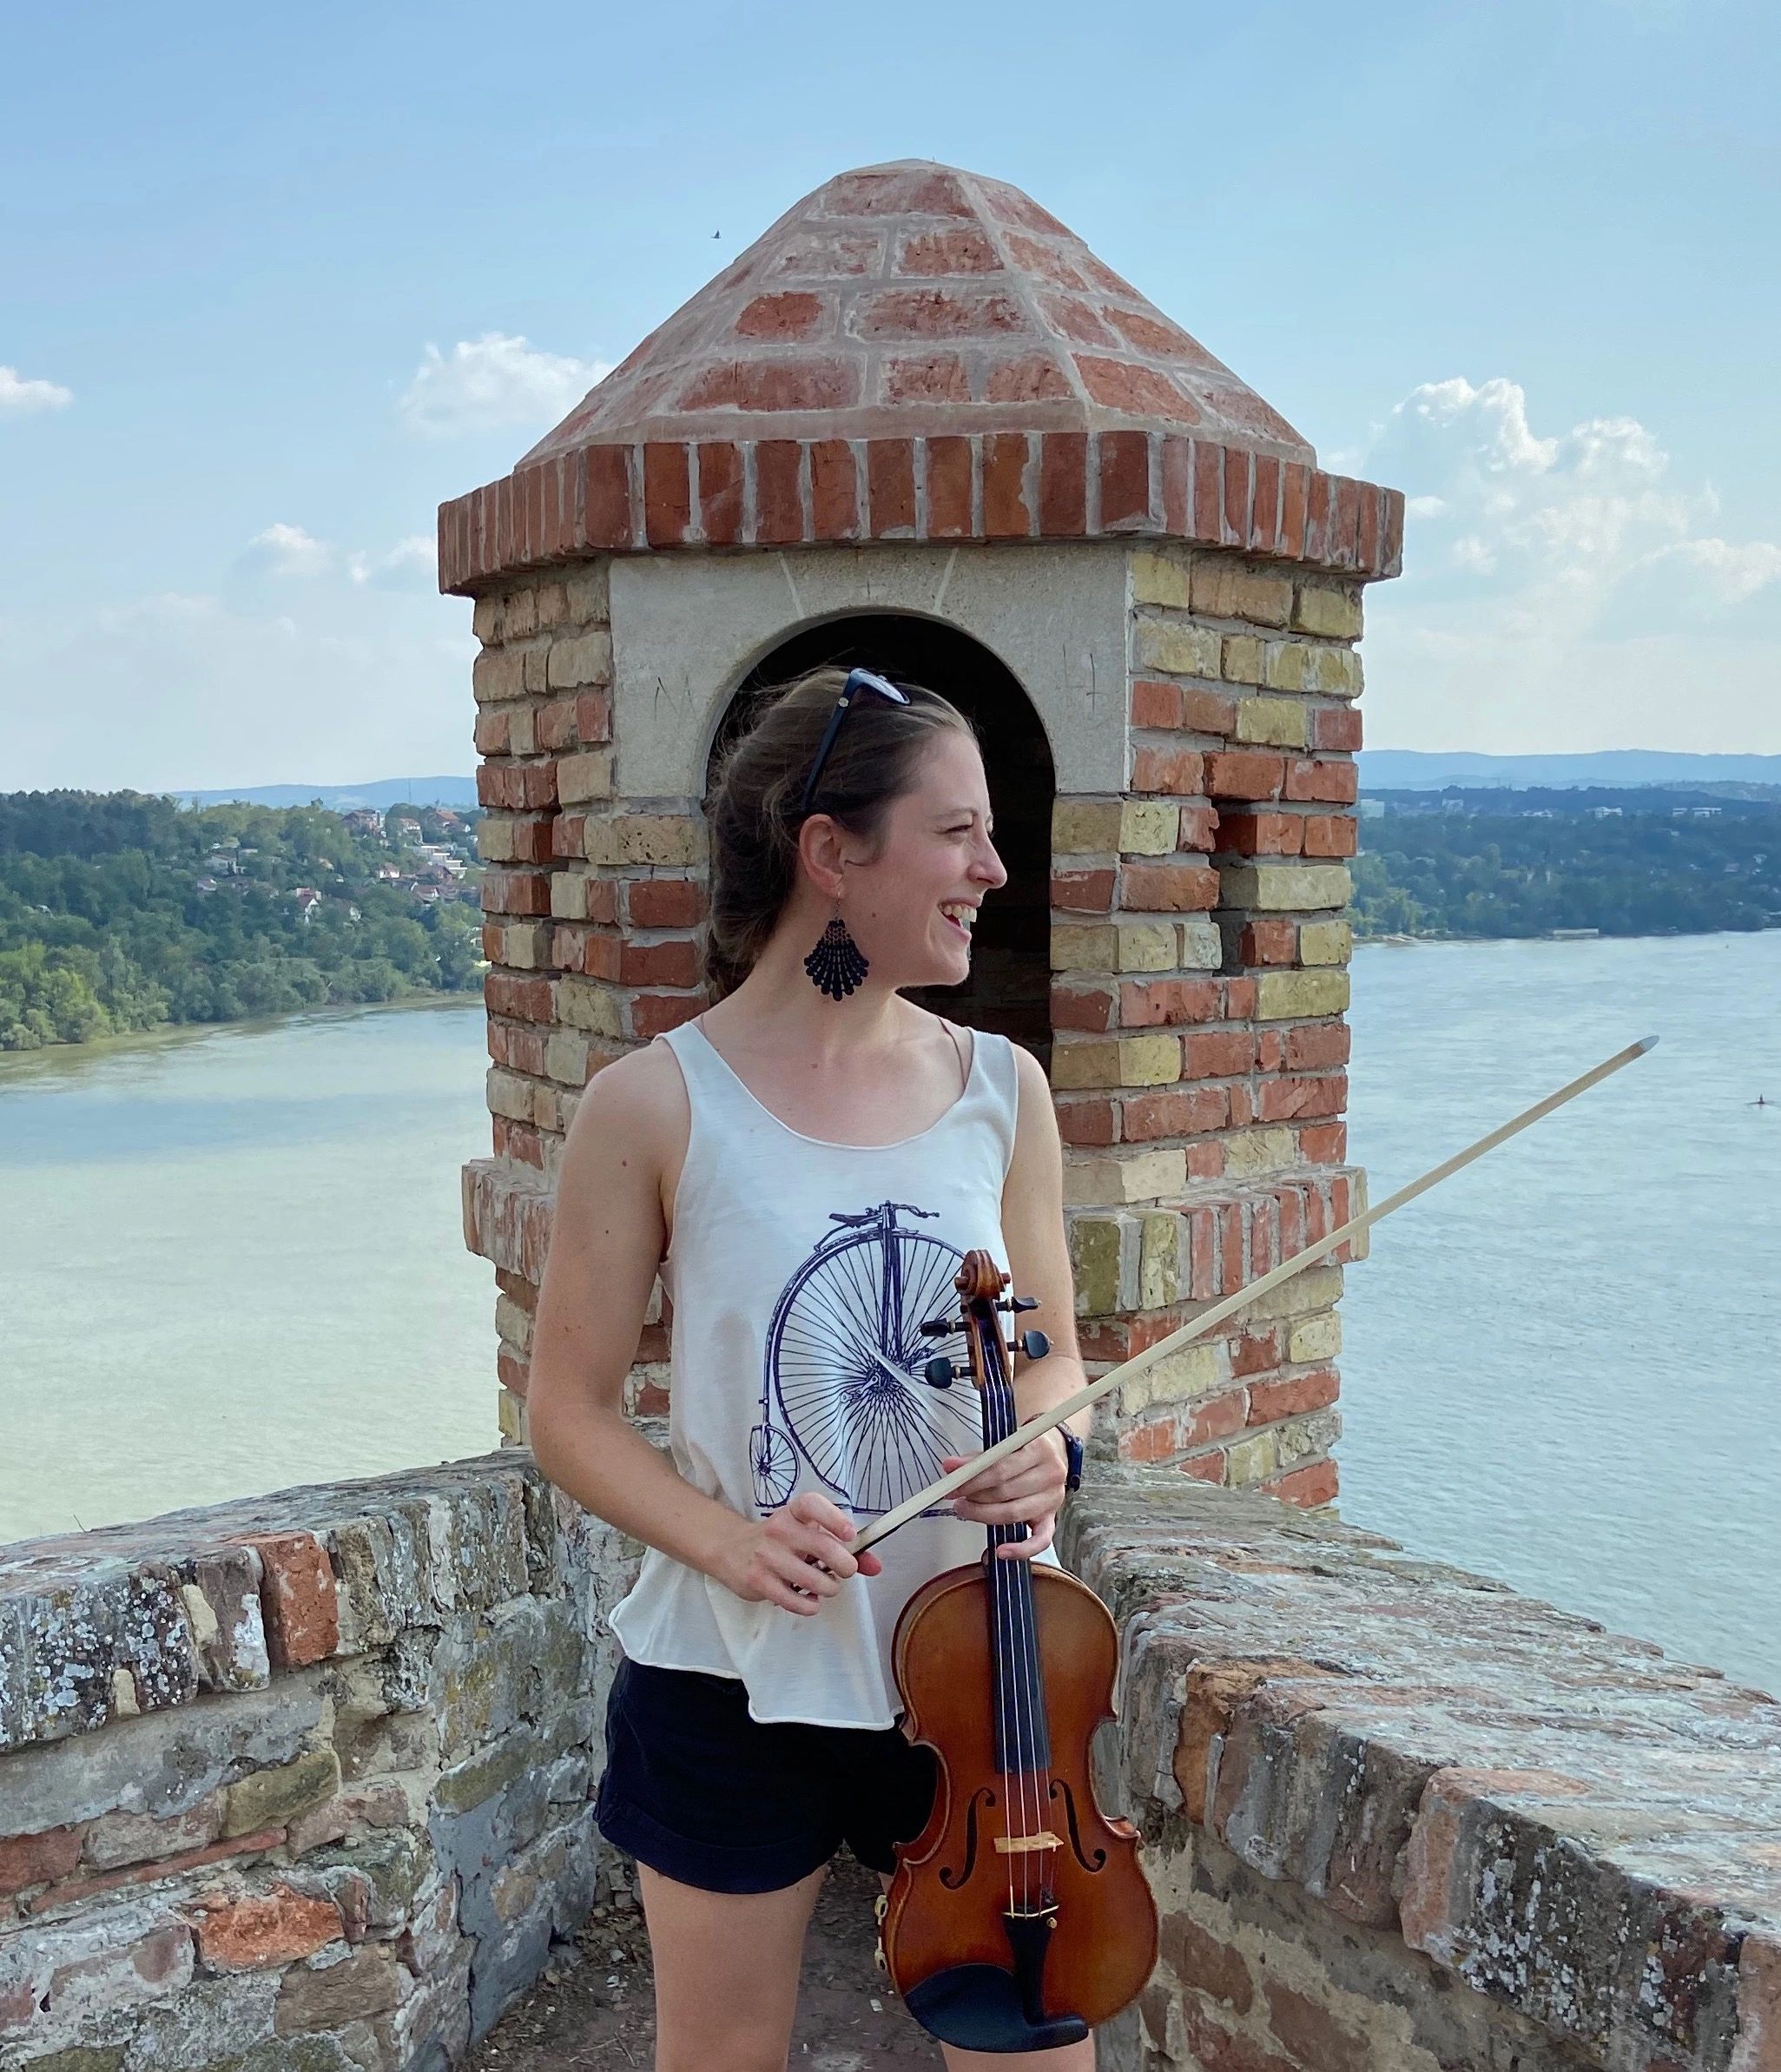 Katrina with violin in front of tower and river in Novi Sad, Serbia